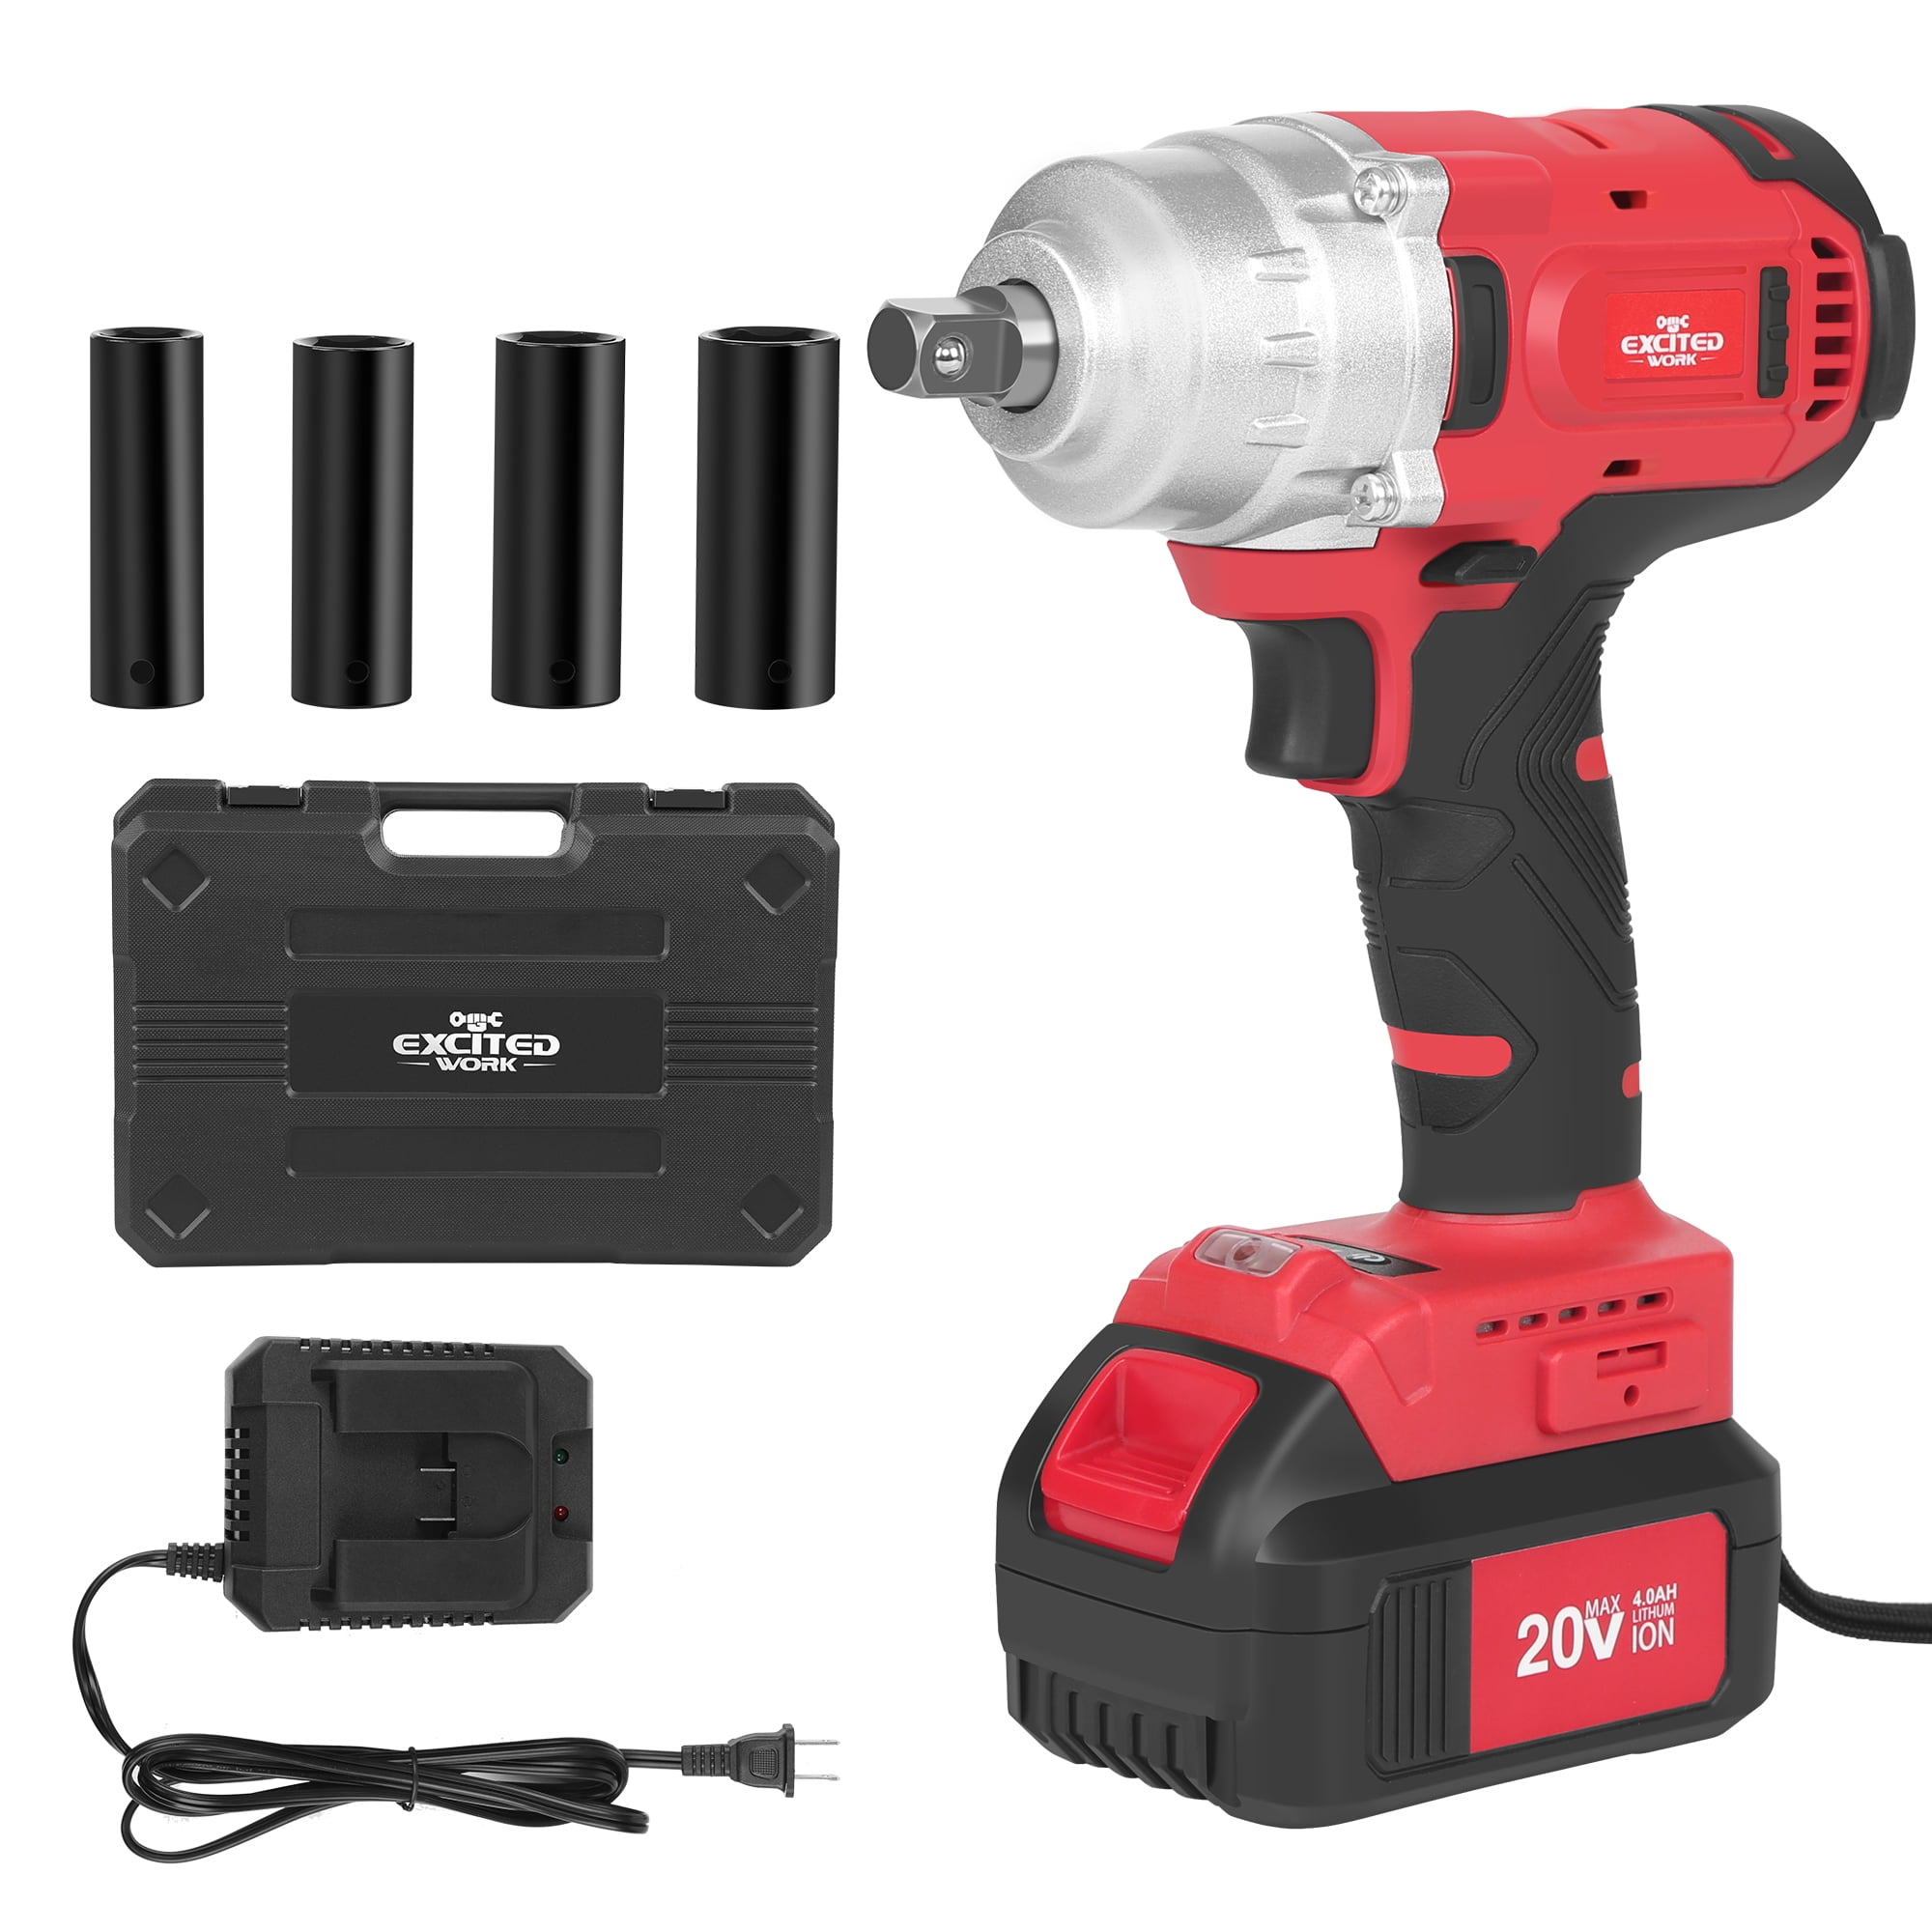 EXCITED WORK 20V MAX Brushless High Torque Impact Wrench, (500Nm)  Cordless Impact Gun, Outdoor Auto Tire Repair Power Tool